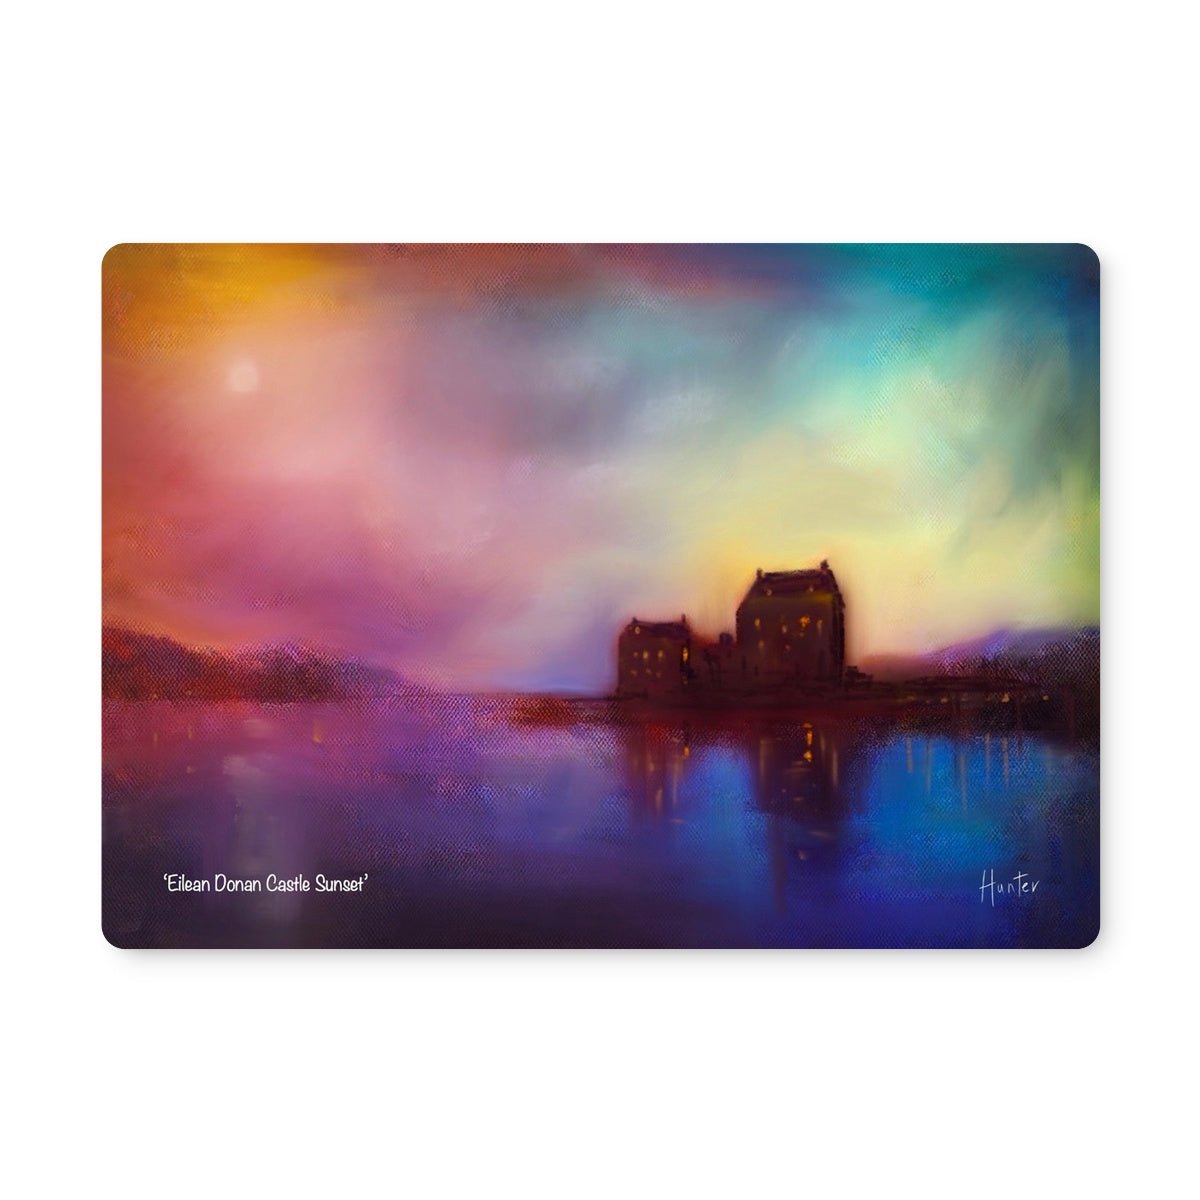 Eilean Donan Castle Sunset Art Gifts Placemat-Placemats-Historic & Iconic Scotland Art Gallery-2 Placemats-Paintings, Prints, Homeware, Art Gifts From Scotland By Scottish Artist Kevin Hunter